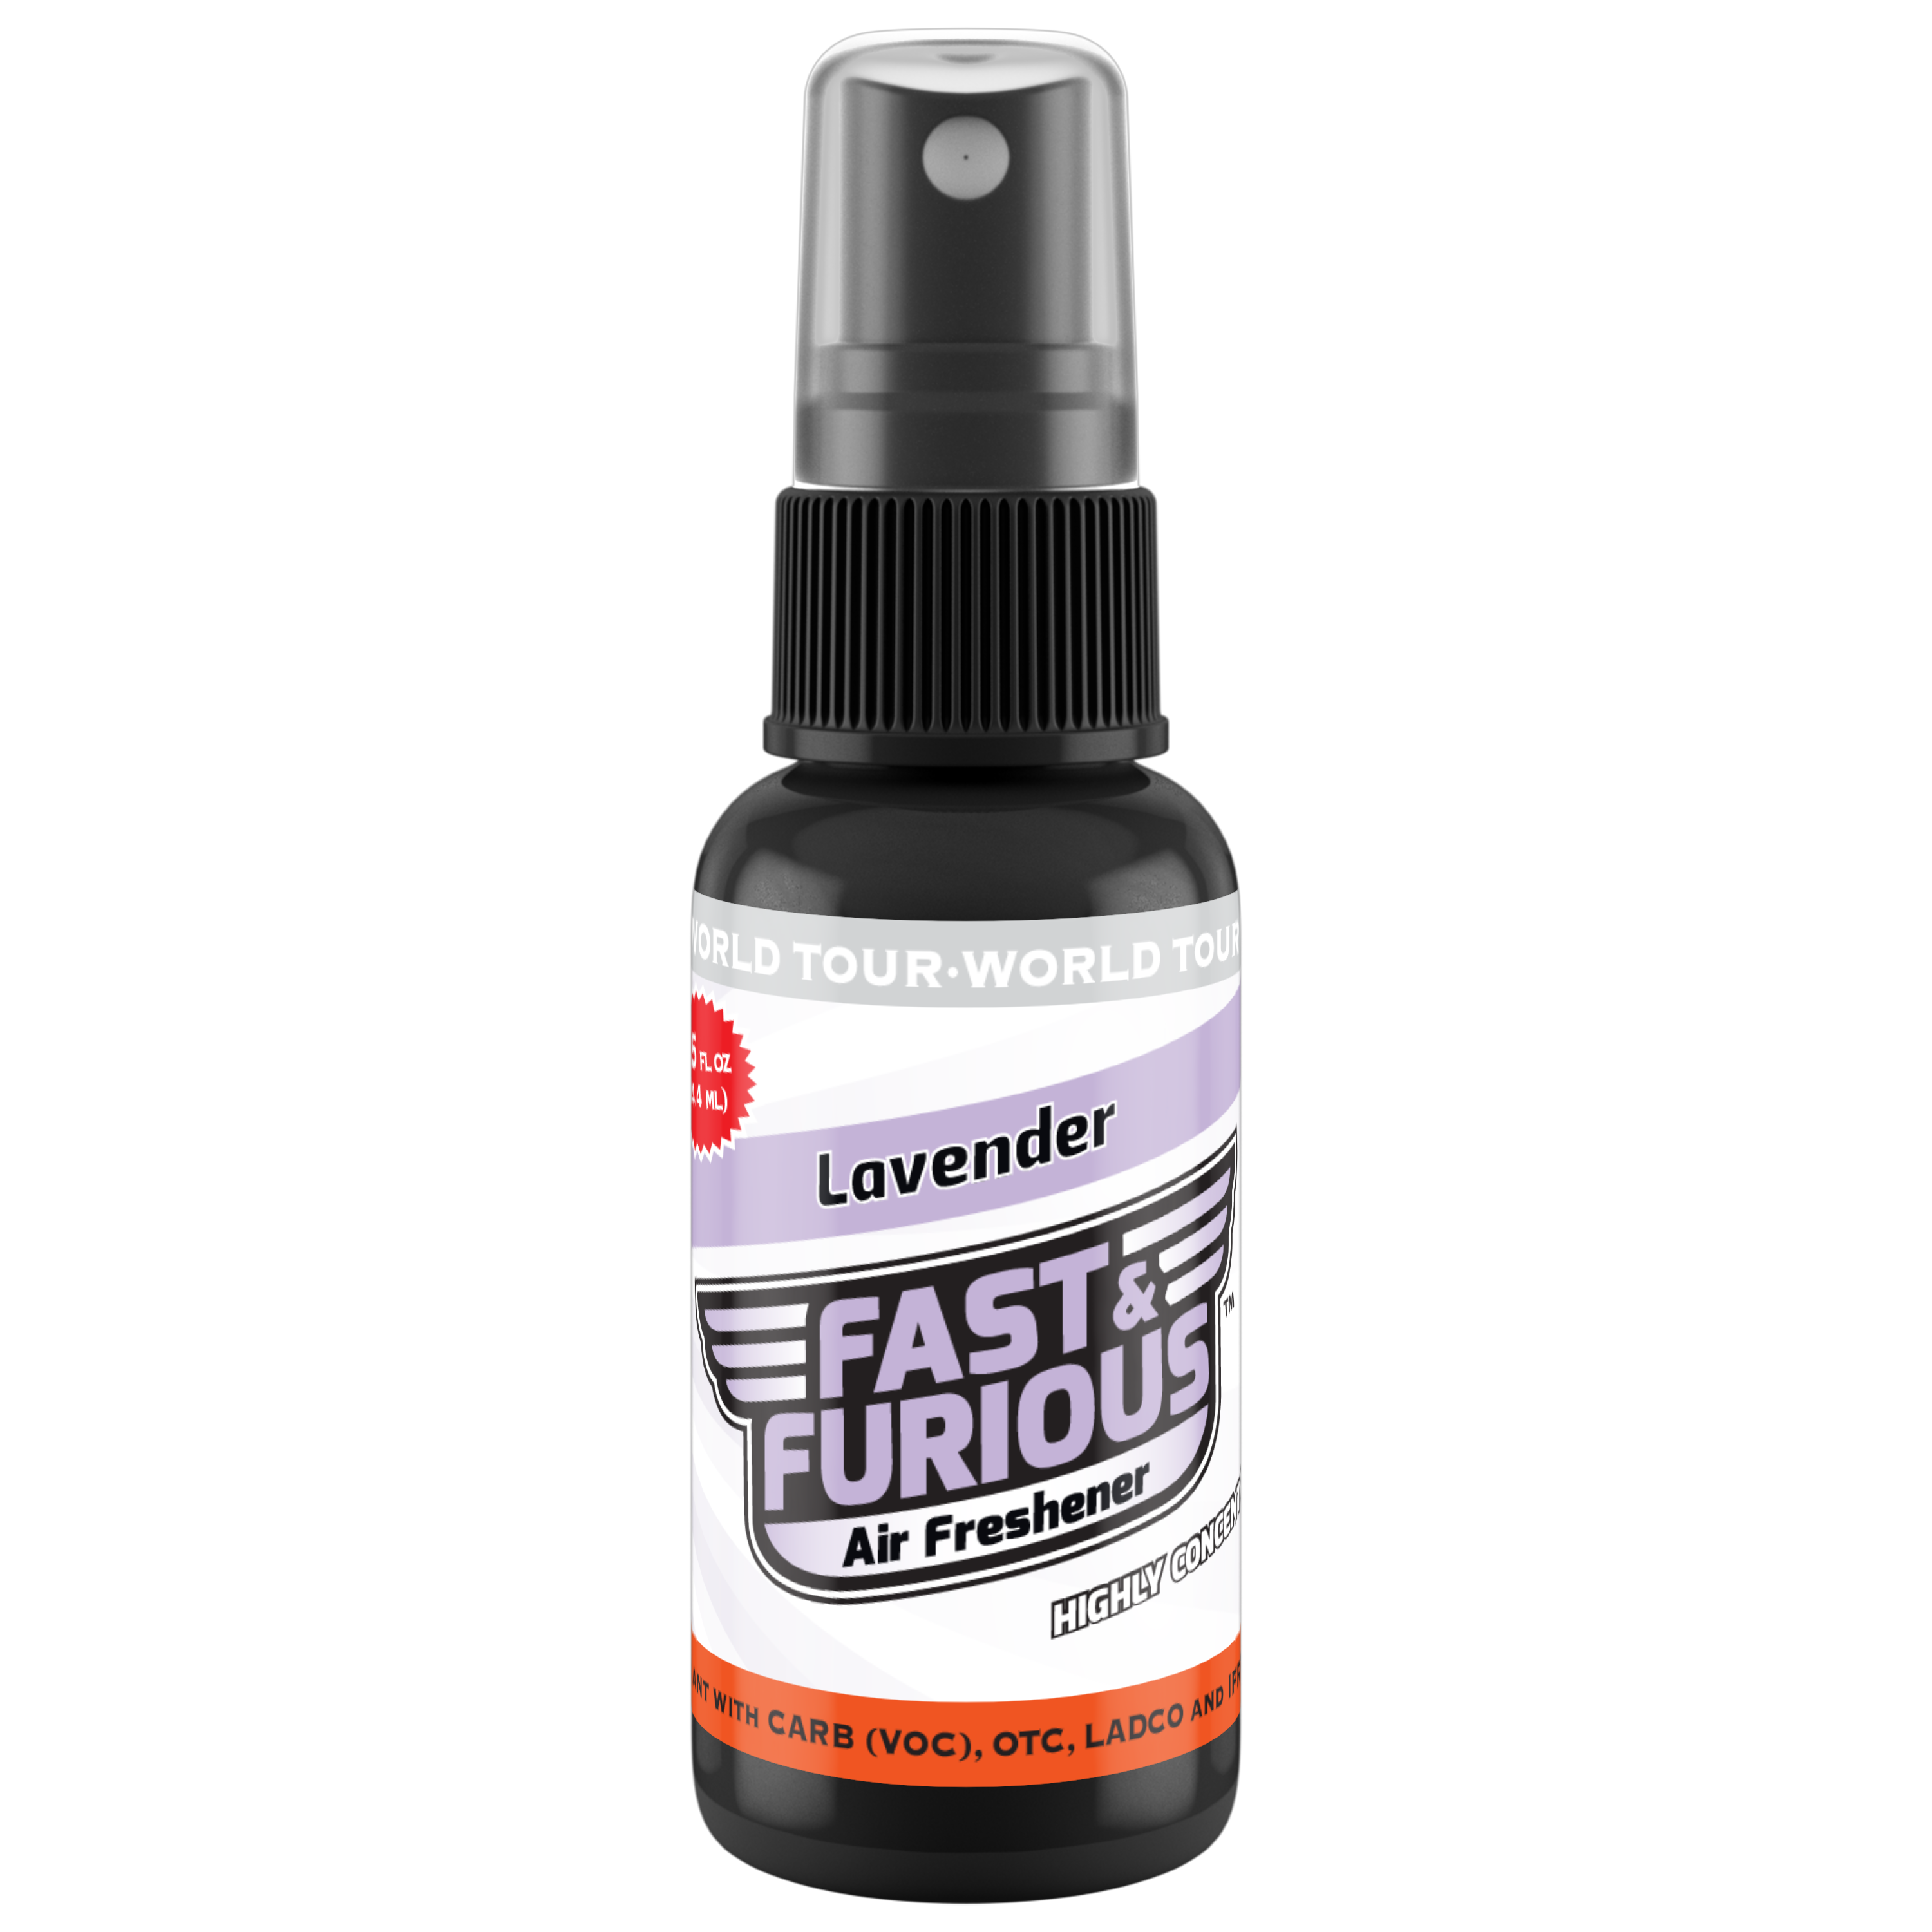 Fast and Furious Air Freshener - Lavender Scent Size: 1.5oz